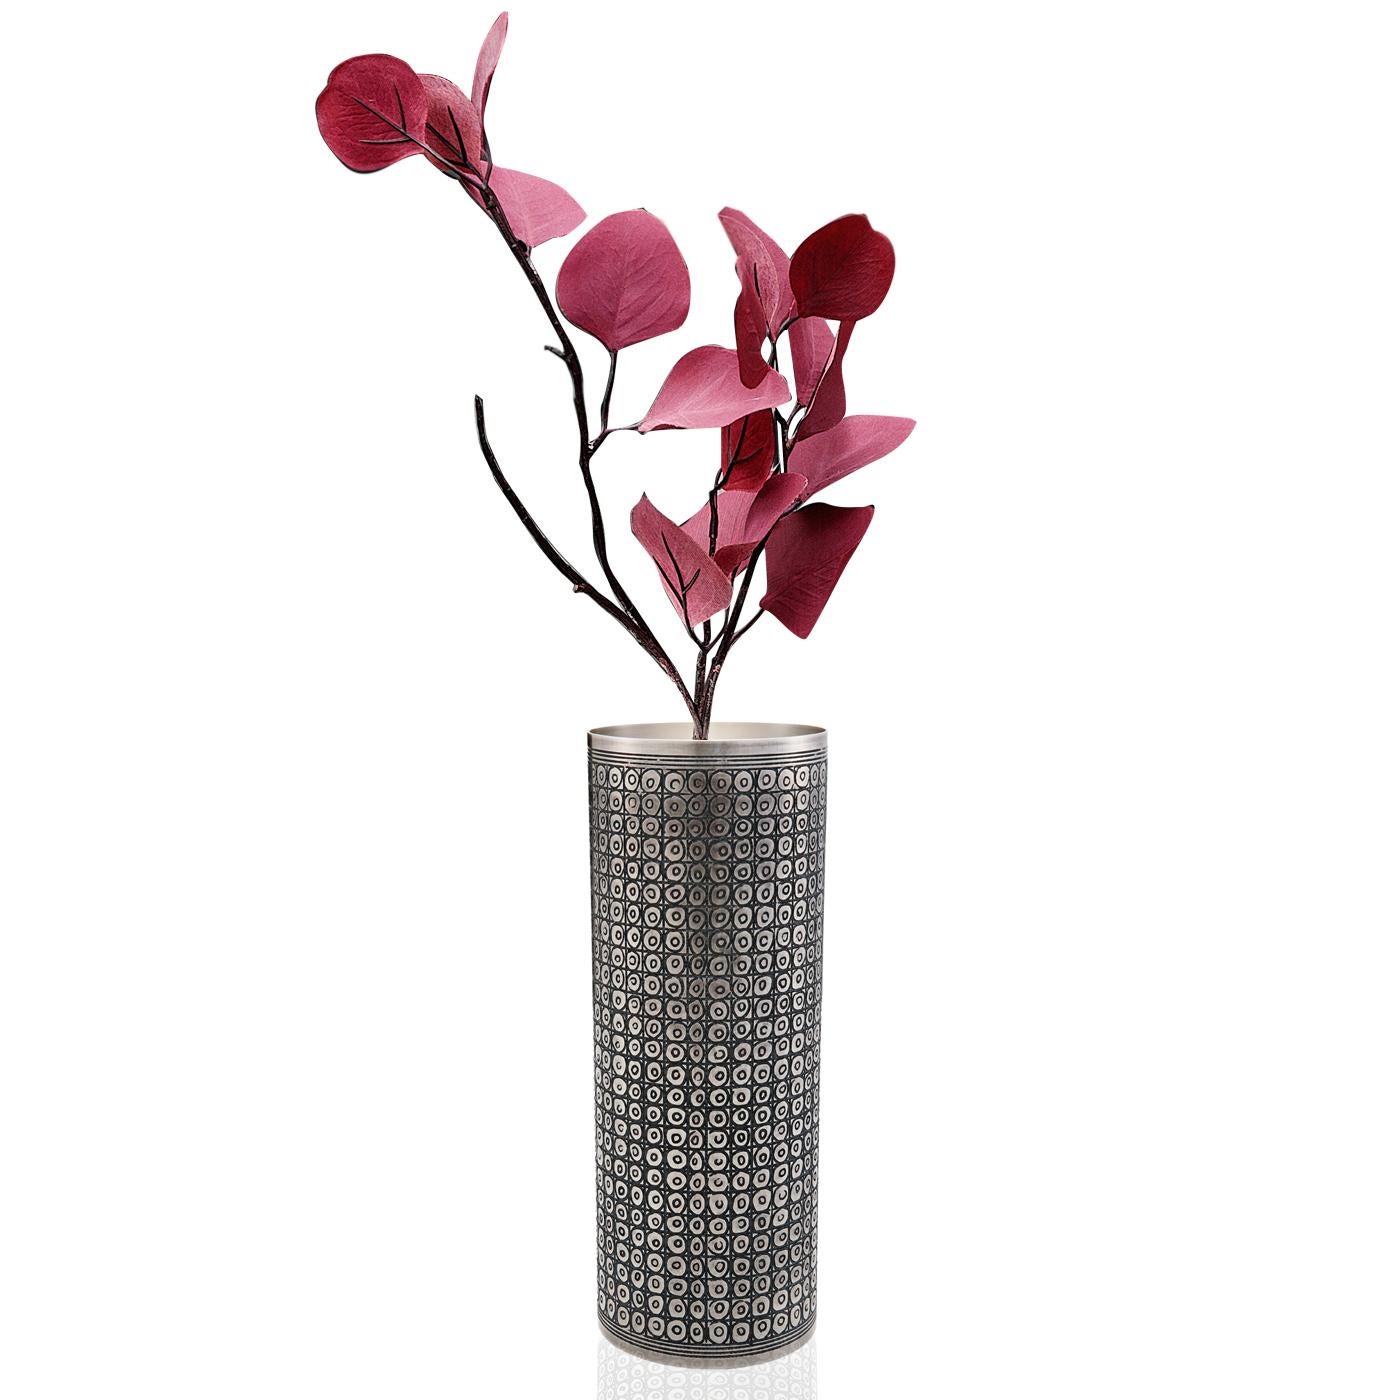 Unique vase crafted in a silver plated alloy has a beautiful pattern etched into it which is the product of much meticulous work in order to achieve the intricate texture and design.